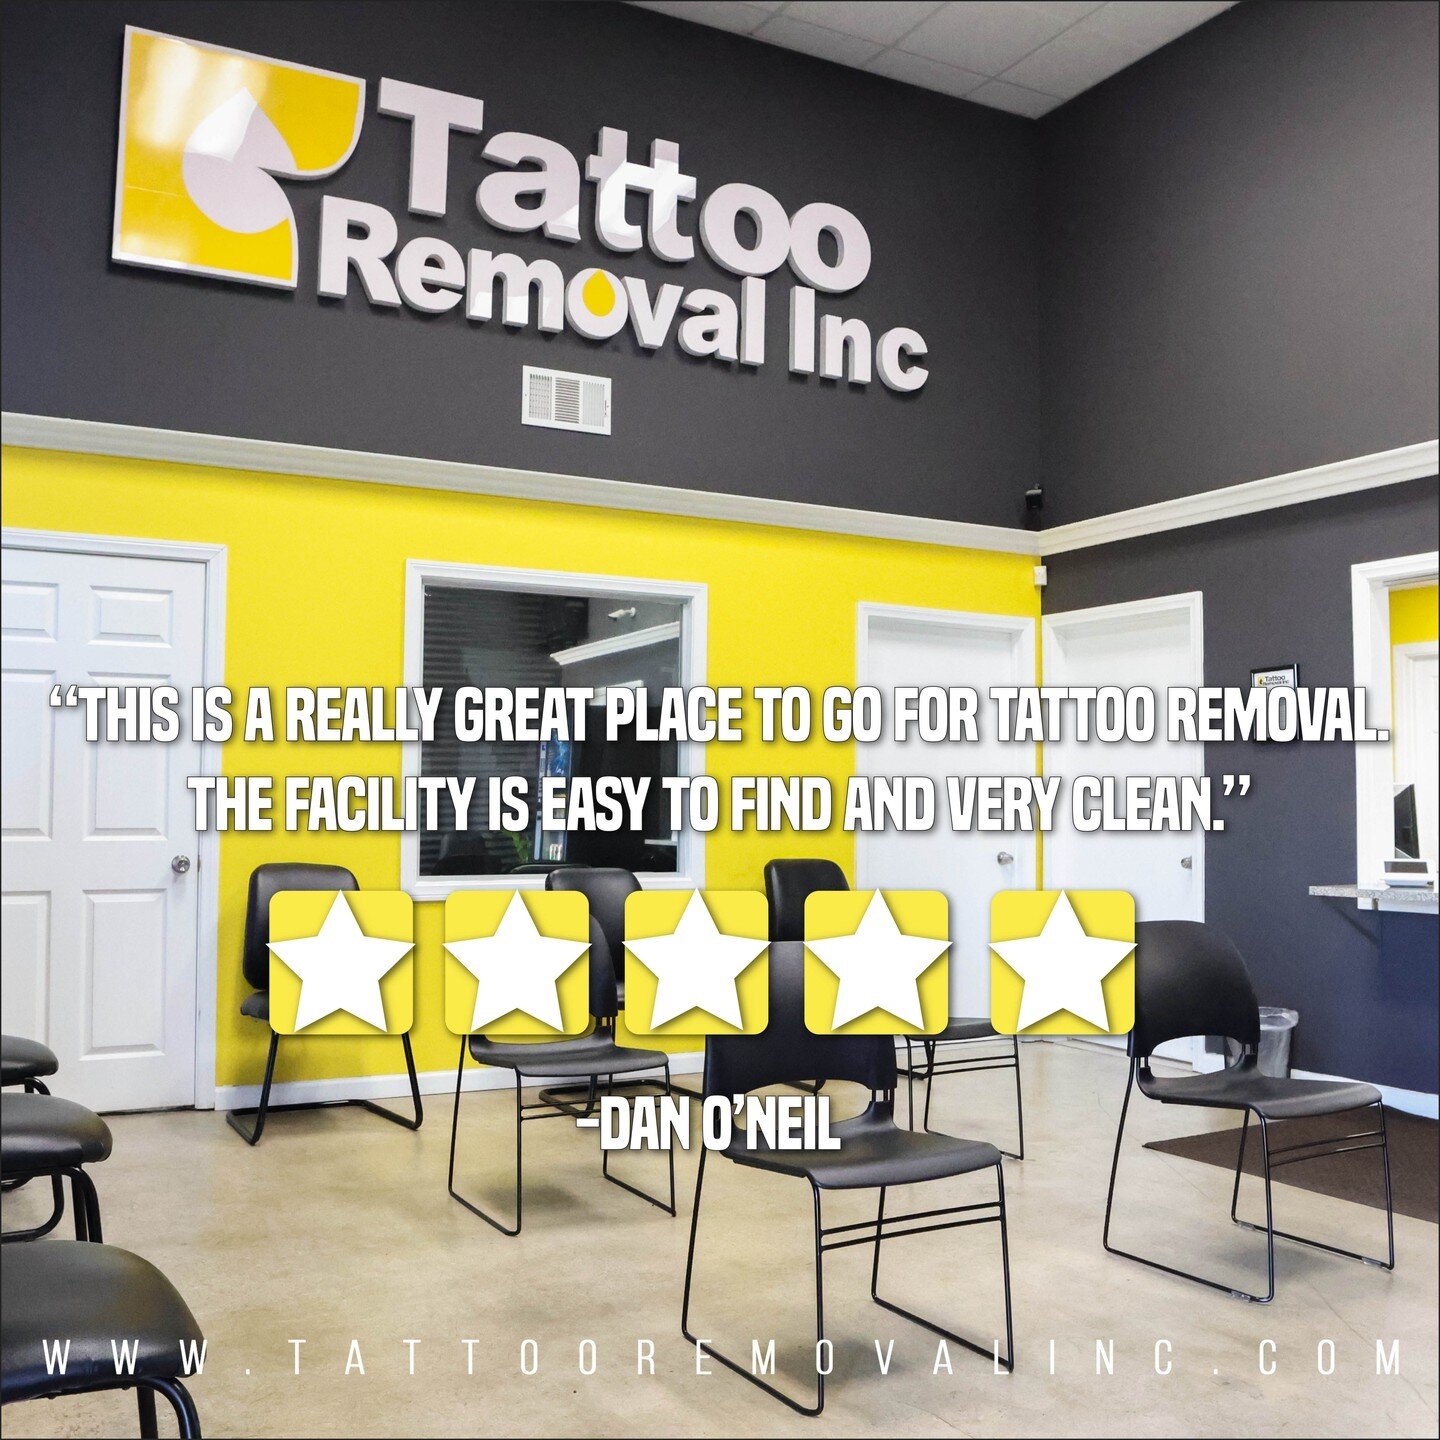 Our patients always know what's the best, take their word for it and if you don't believe it then check out their testimonials.

#HappyToHelp #BeforeAndAfterTattooRemoval #TattooRemovalIncSouthGate #SouthGateTattooRemovalInc #LaserTattooClinicSouthGa